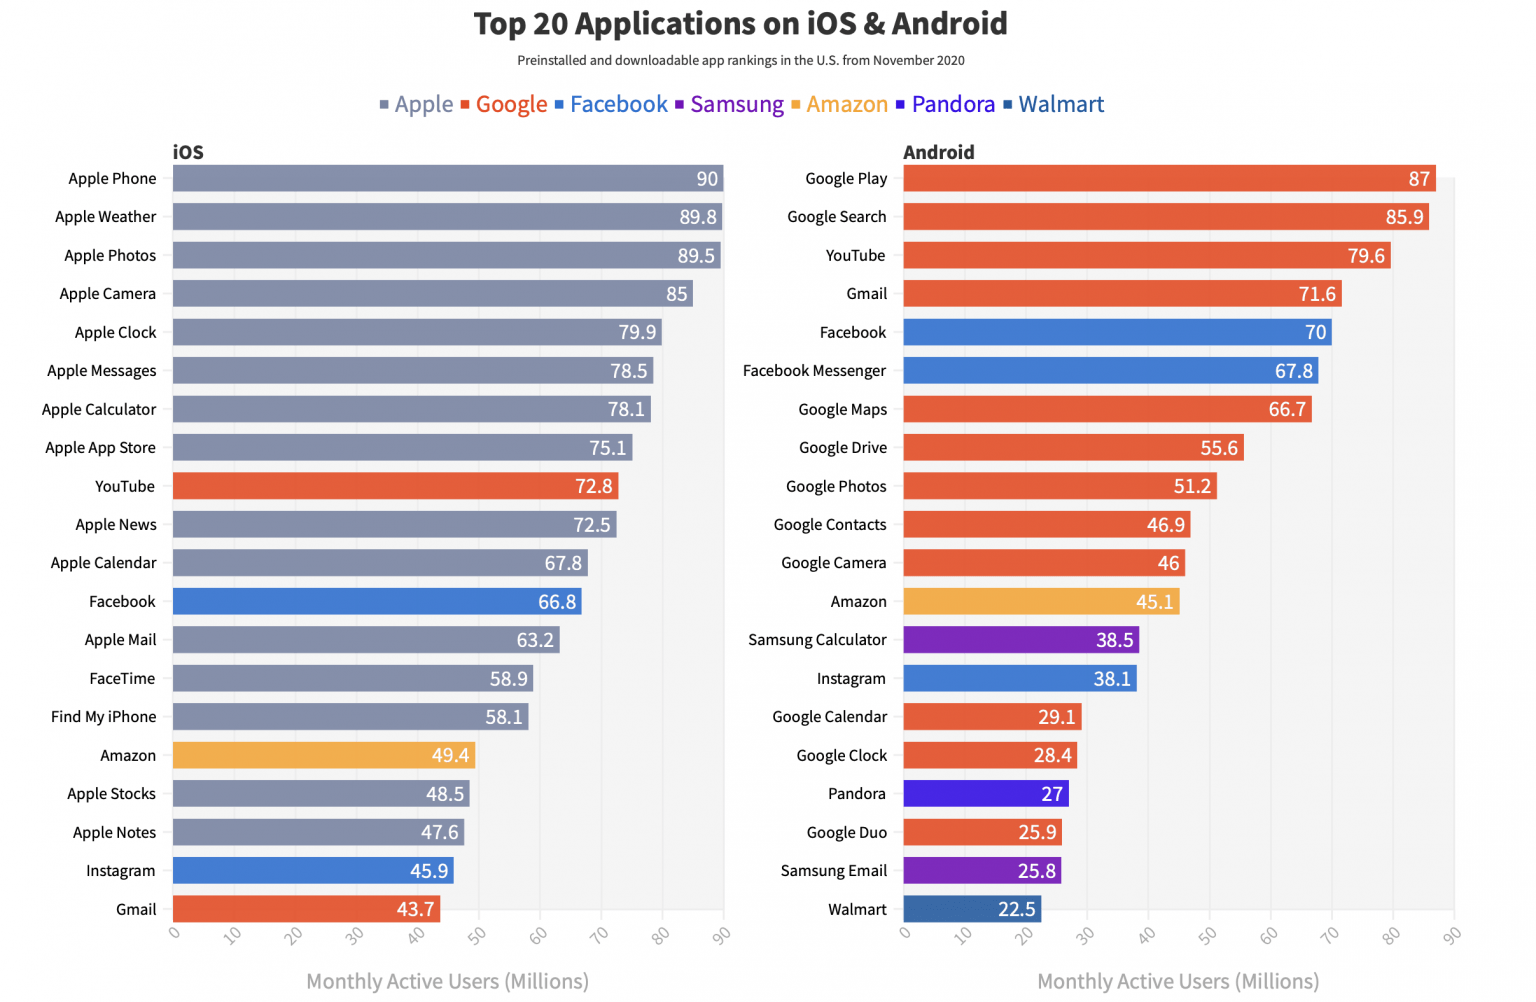 Top apps on iOS and Android